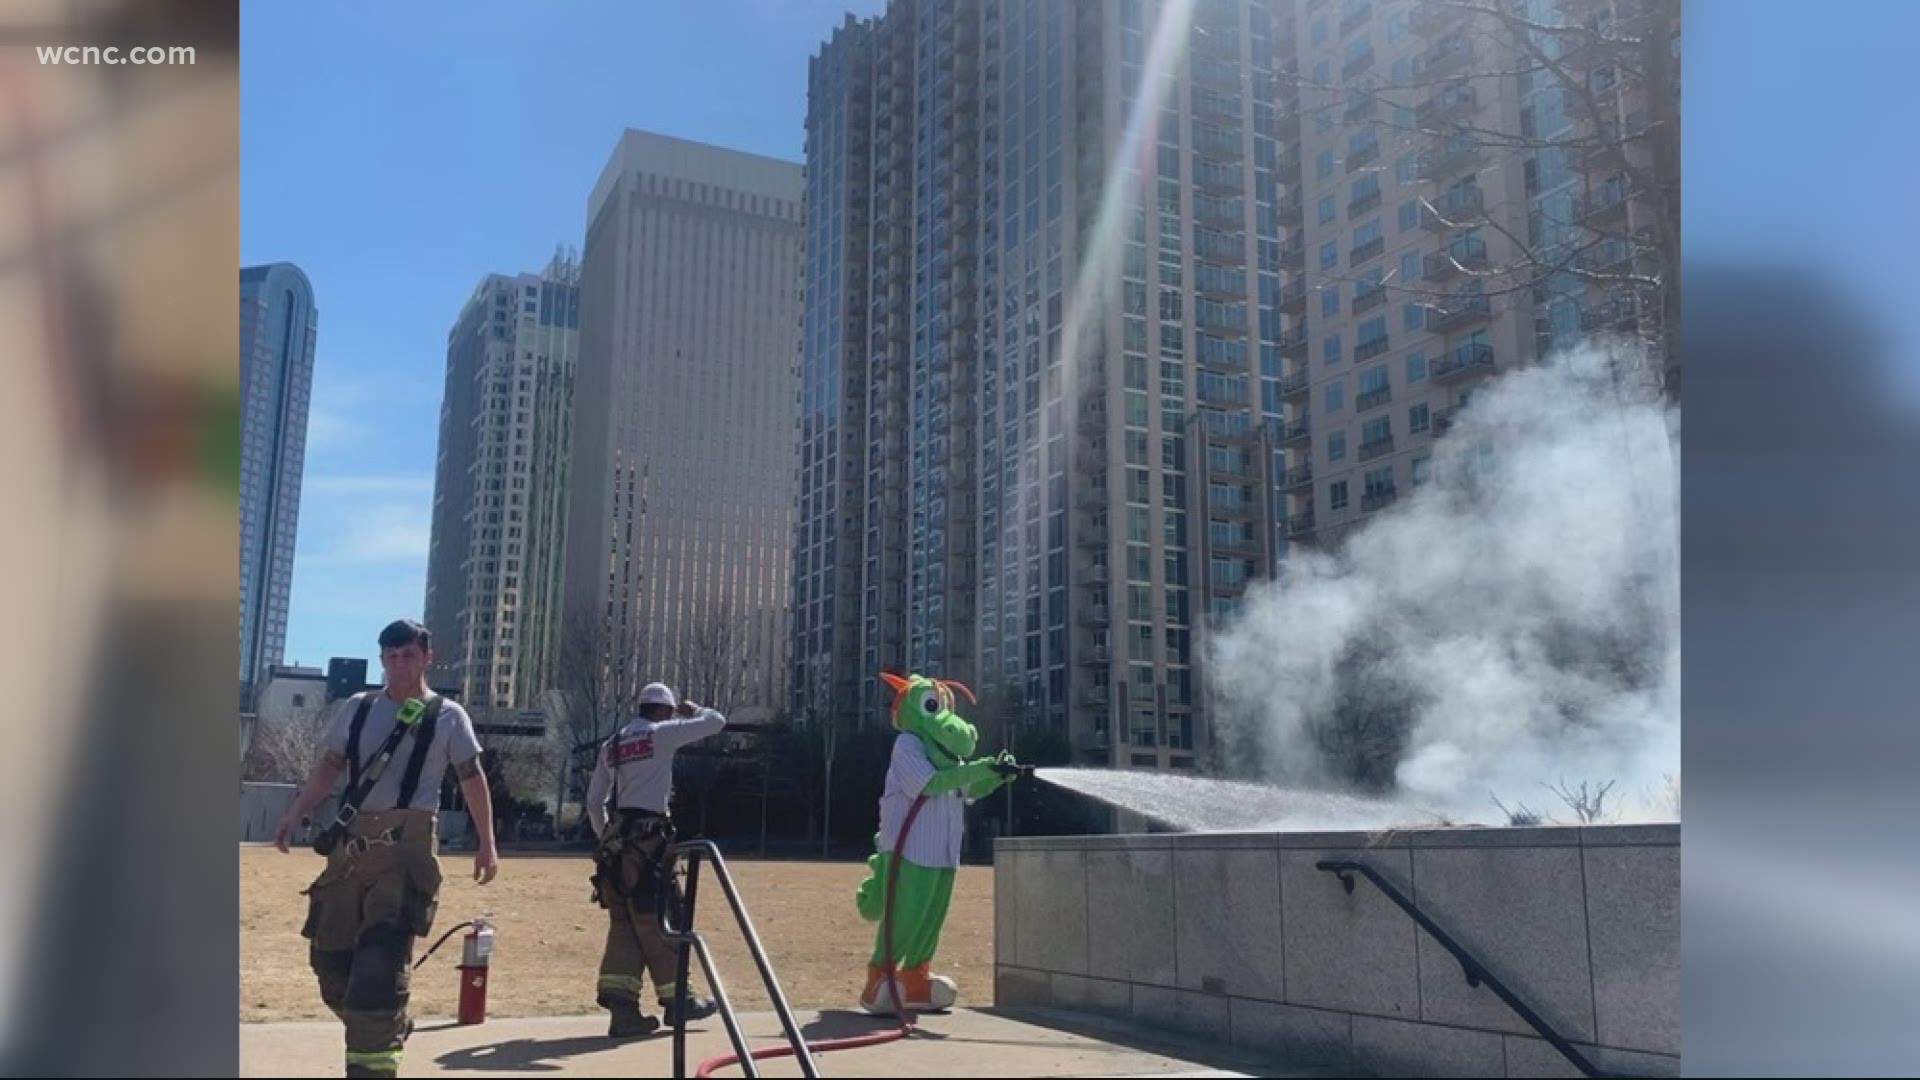 Homer the Dragon was shooting a video when he realized there was an opportunity to help. When firefighters arrived, he says they even let him use the hose.